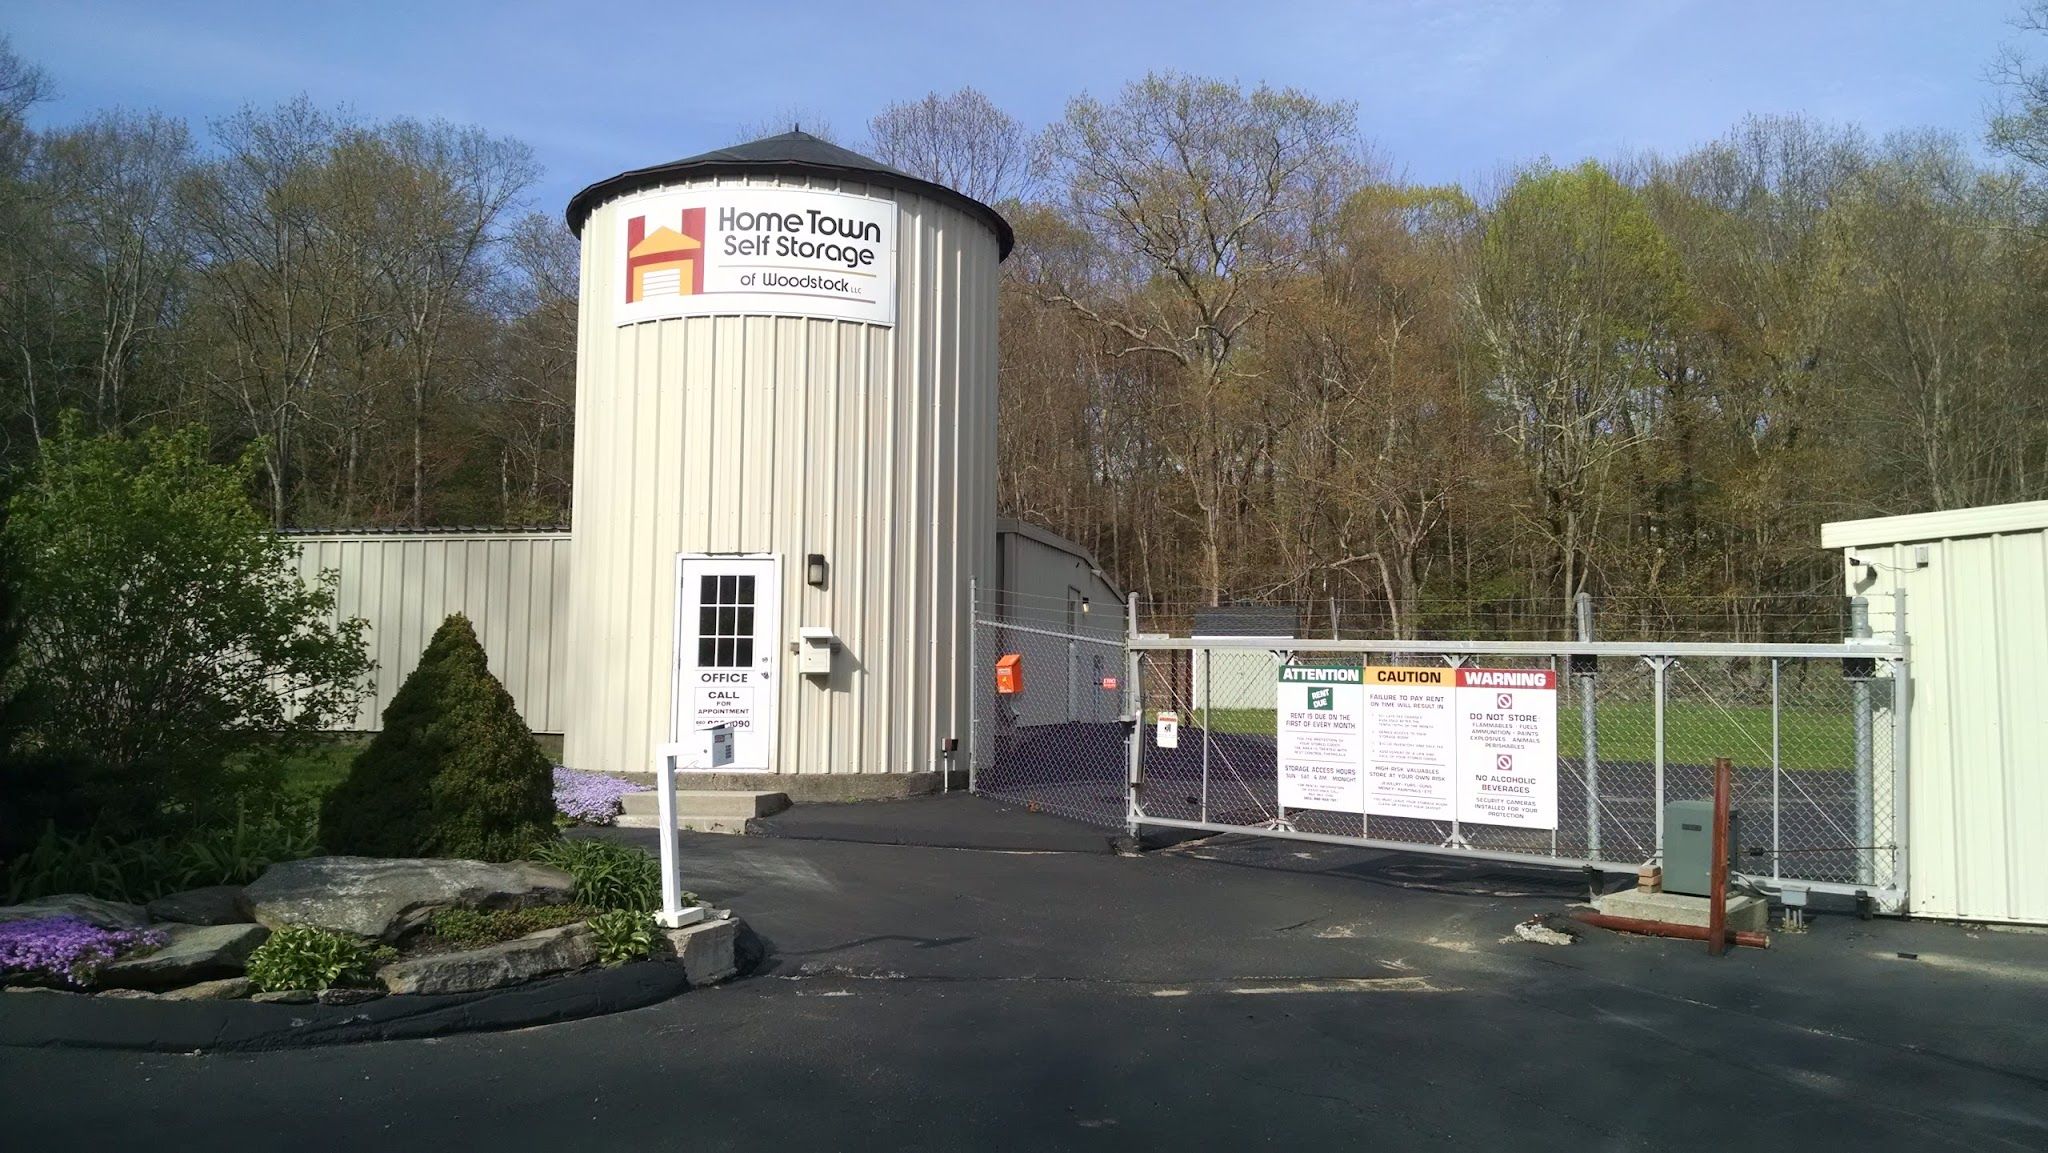 Services & Products Home Town Self Storage of Woodstock LLC in Woodstock Valley CT